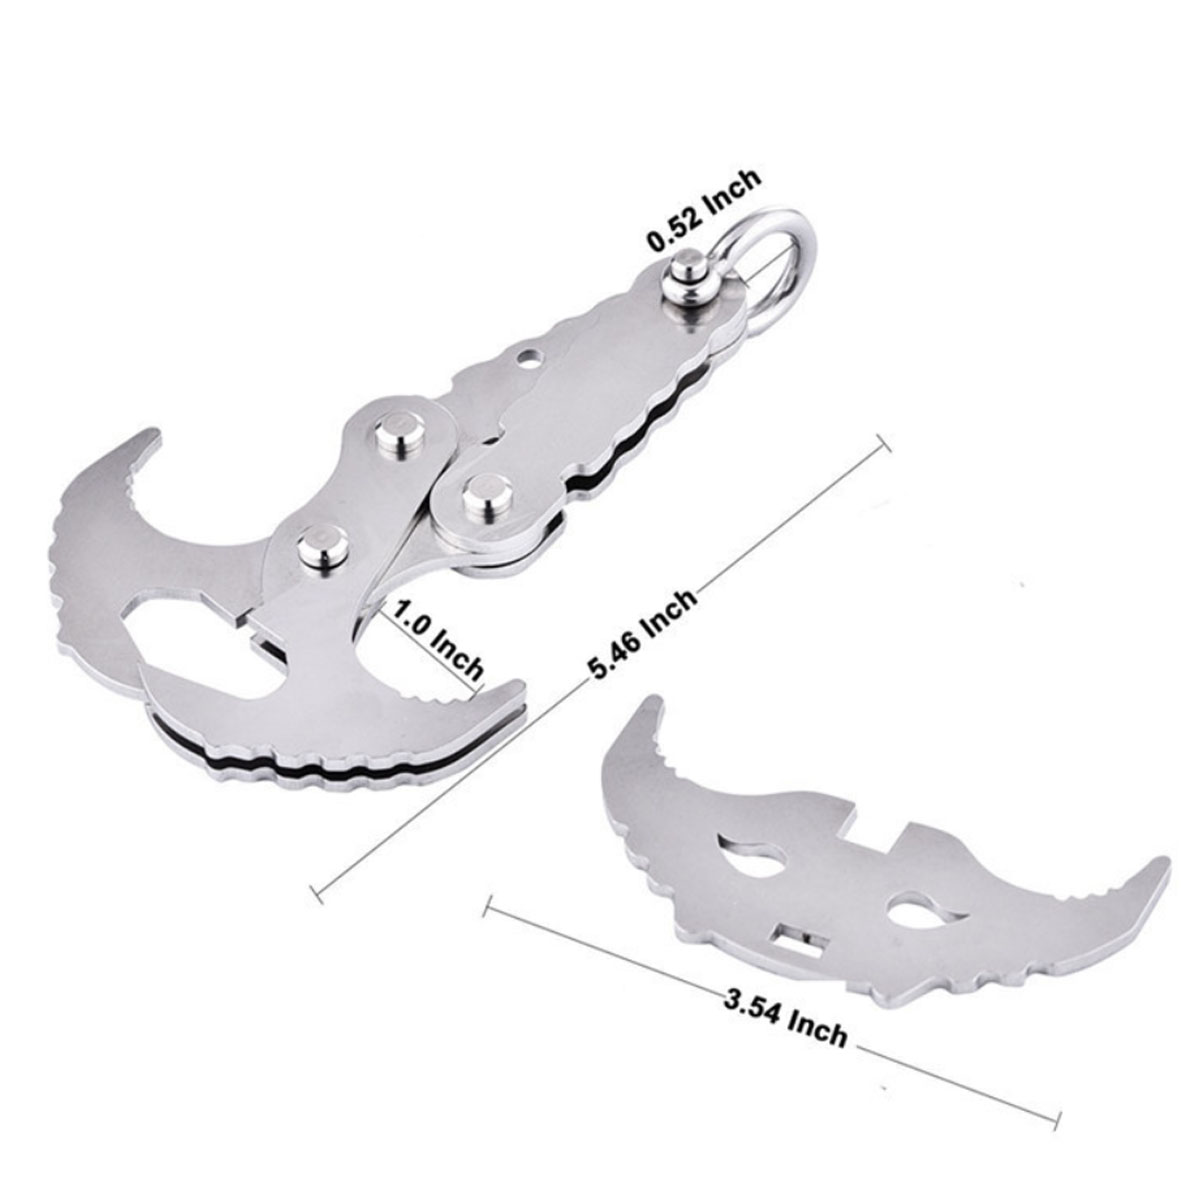 Outdoor-Stainless-Steel-Folding-Grappling-Gravity-Hooks-Climbing-Claw-Camping-1655935-5